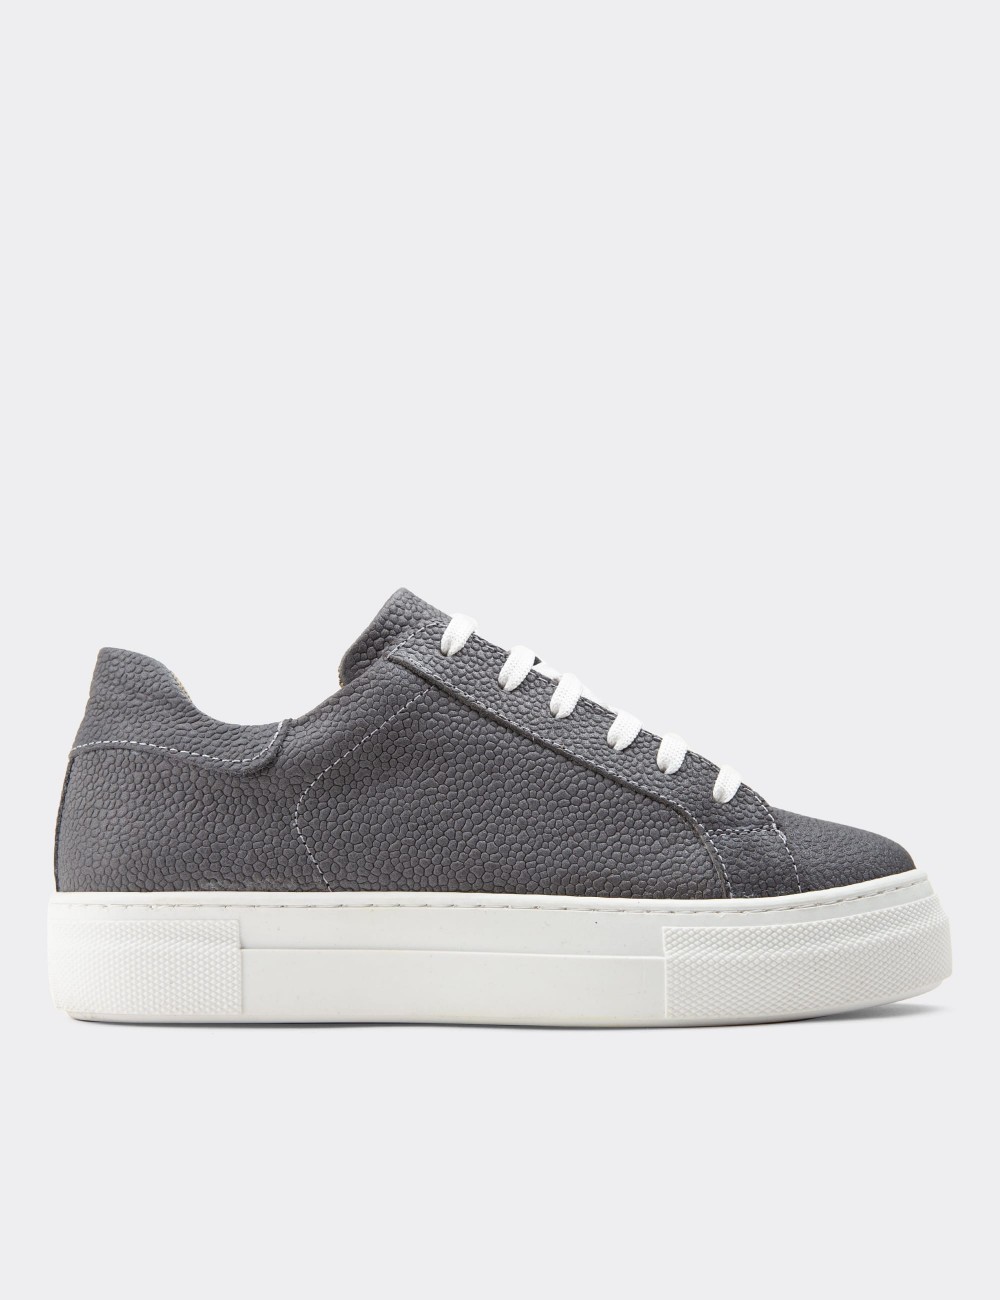 Gray  Leather Sneakers - Z1681ZGRIC04